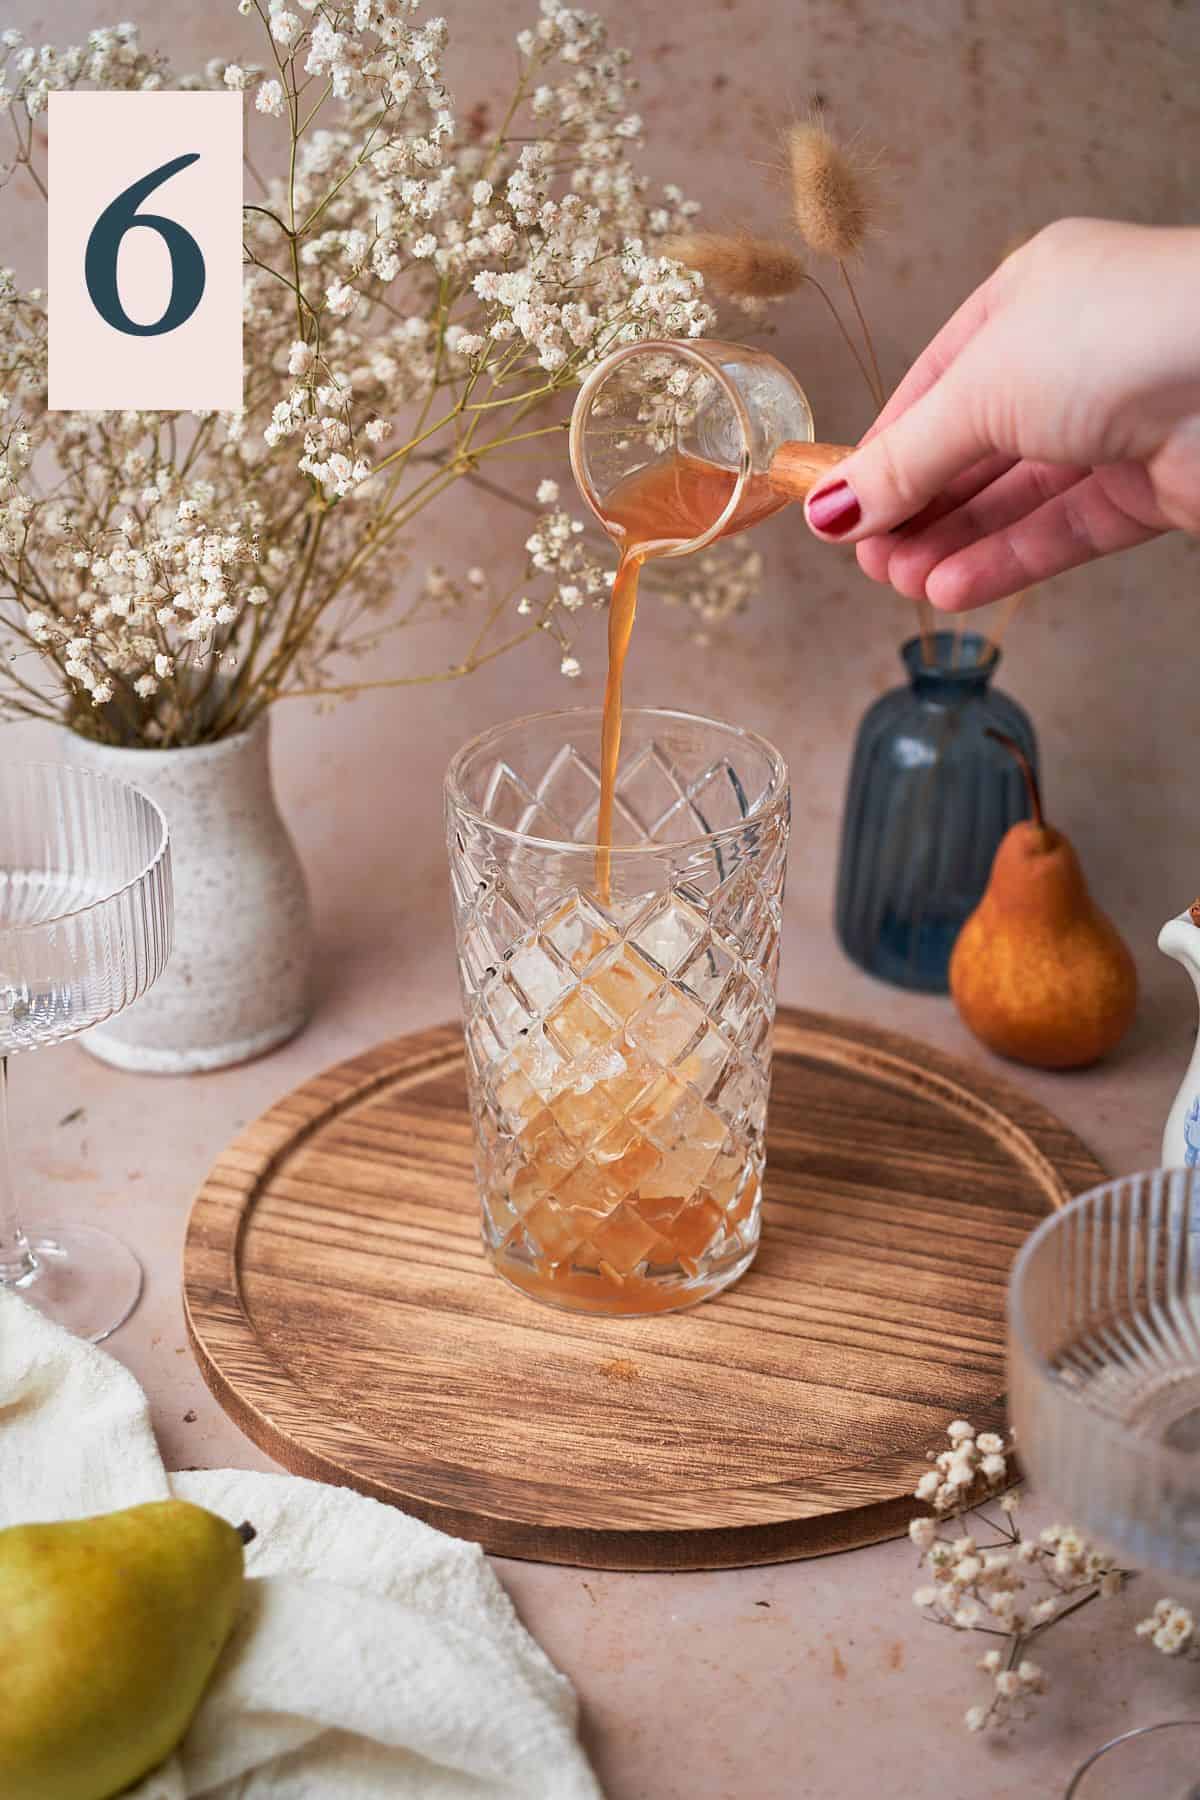 hand pouring spiced simple syrup into a cocktail shaker surrounded by pears, flowers, and a white linen napkin.